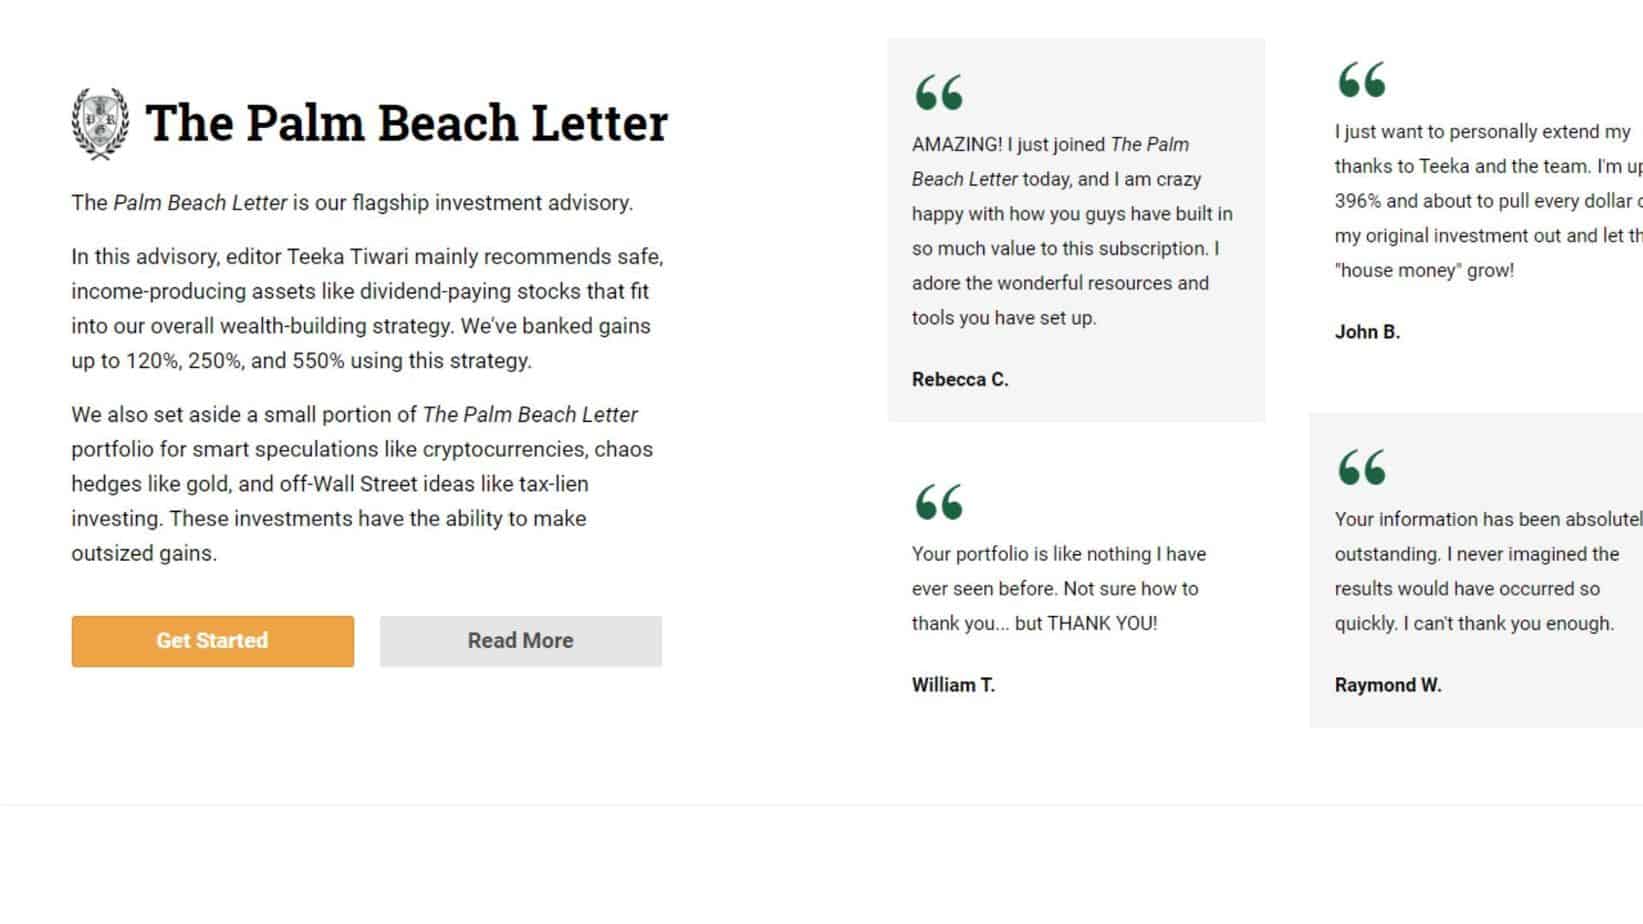 Is The Palm Beach Letter Any Good